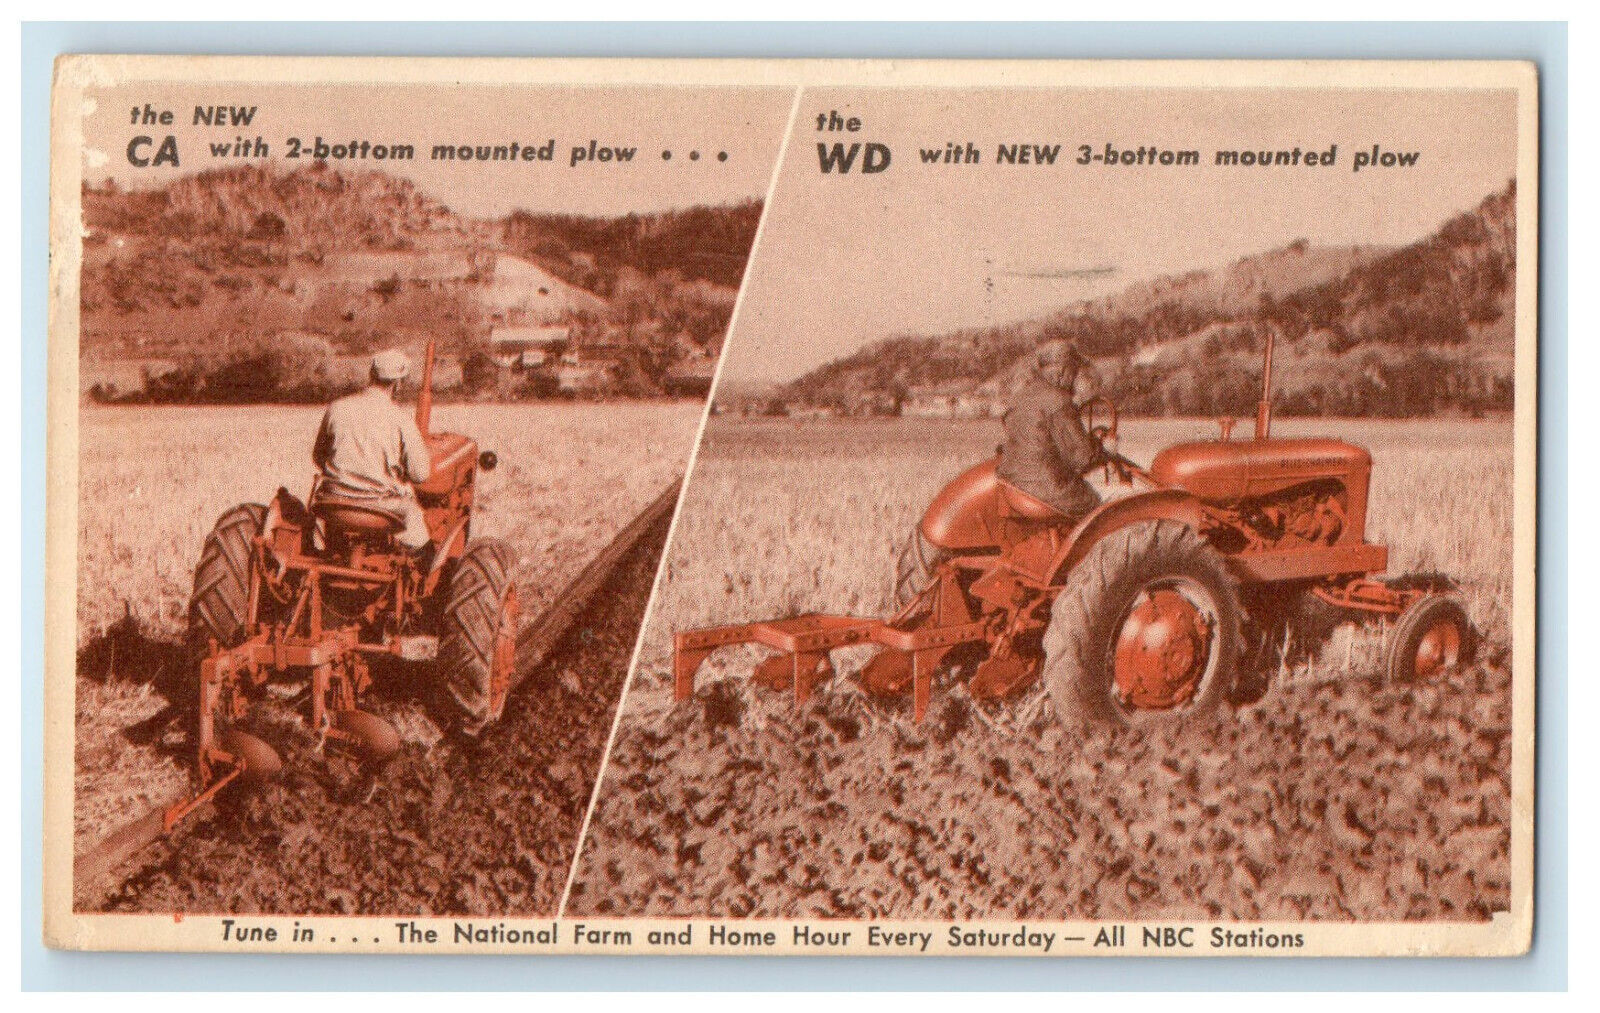 1954 CA 2 Bottom and WD 3 Bottom Mounted Plows Advertising Postcard